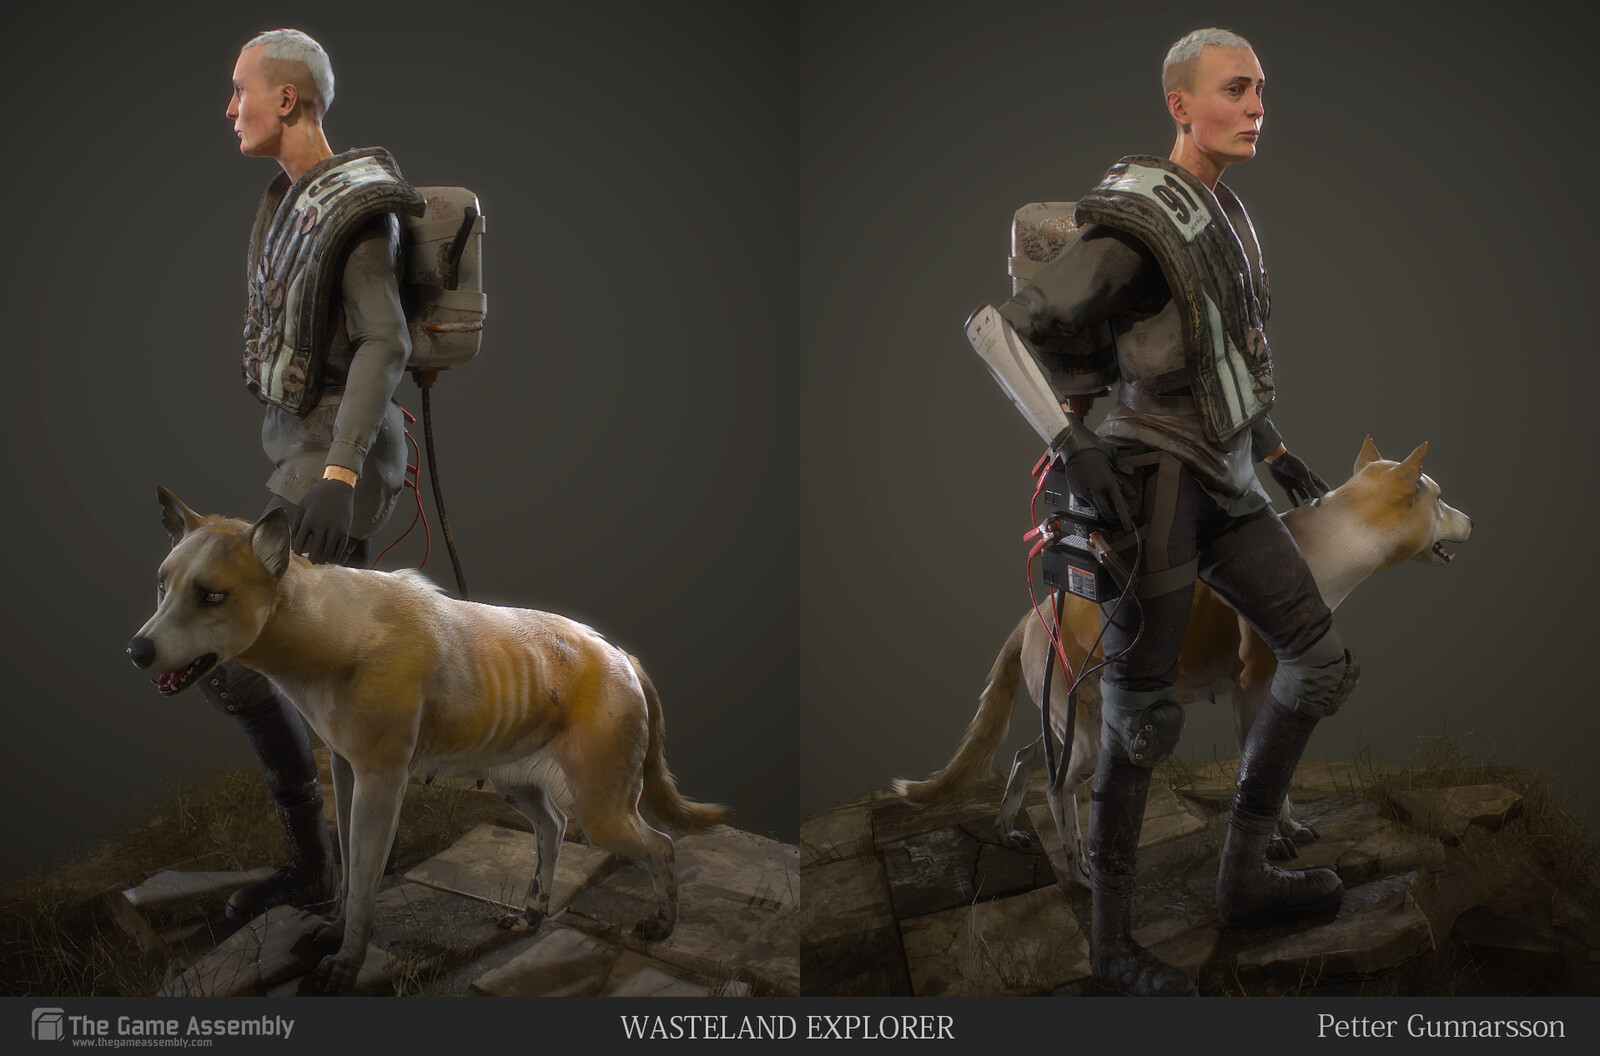 The character is 36'371 tris, and the dog 11'230 tris.